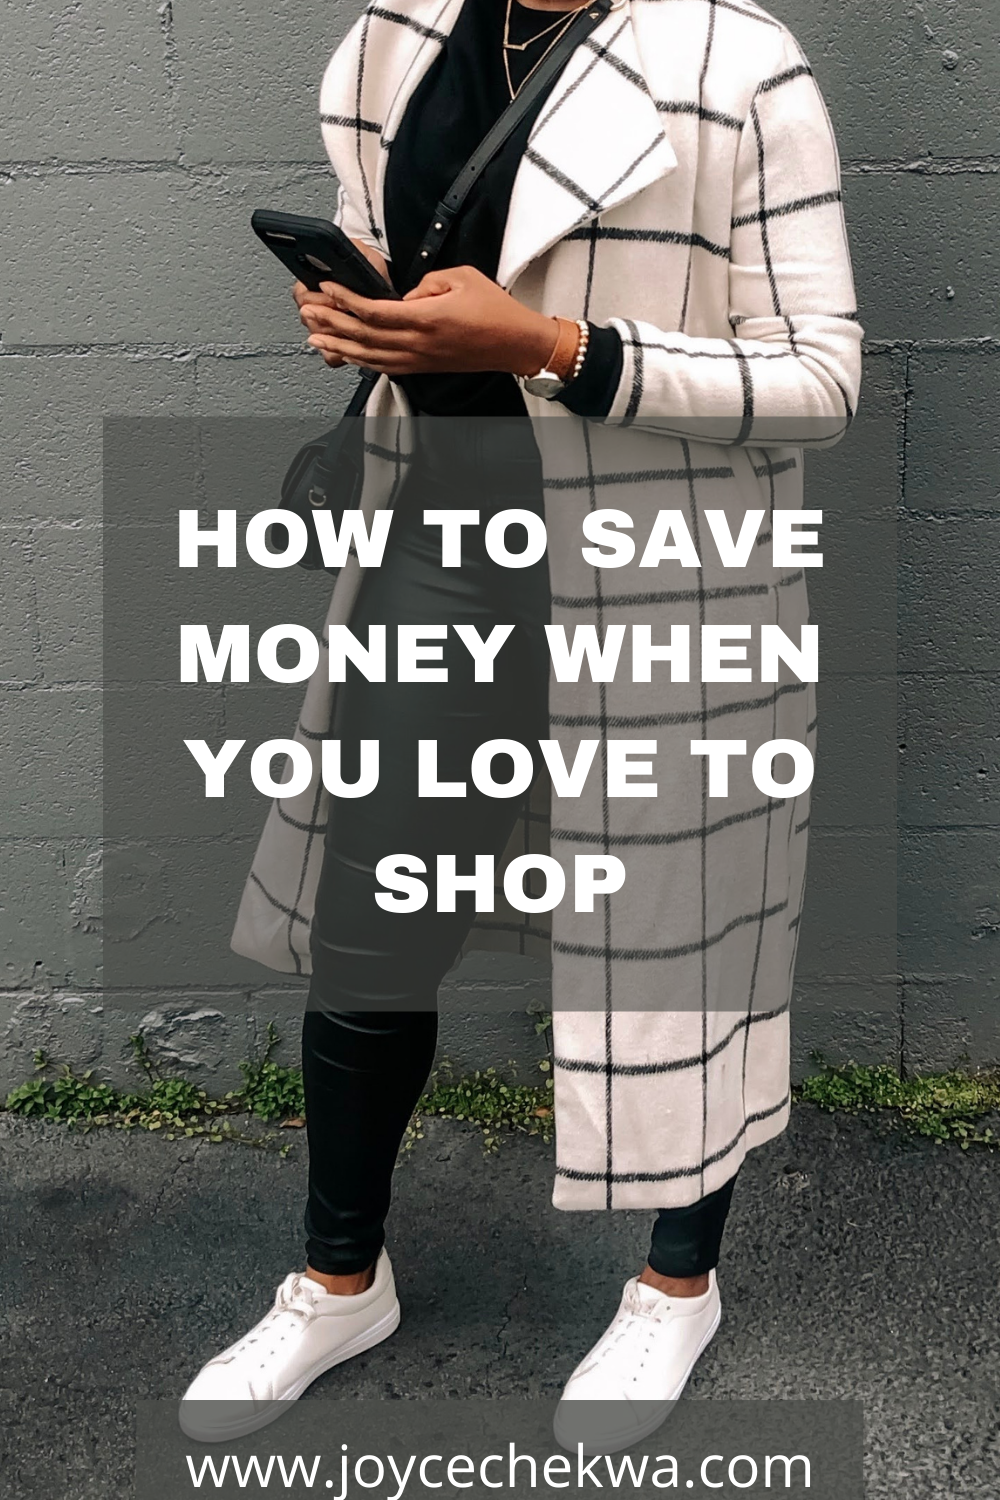 HOW TO SAVE MONEY WHEN YOU LOVE TO SHOP